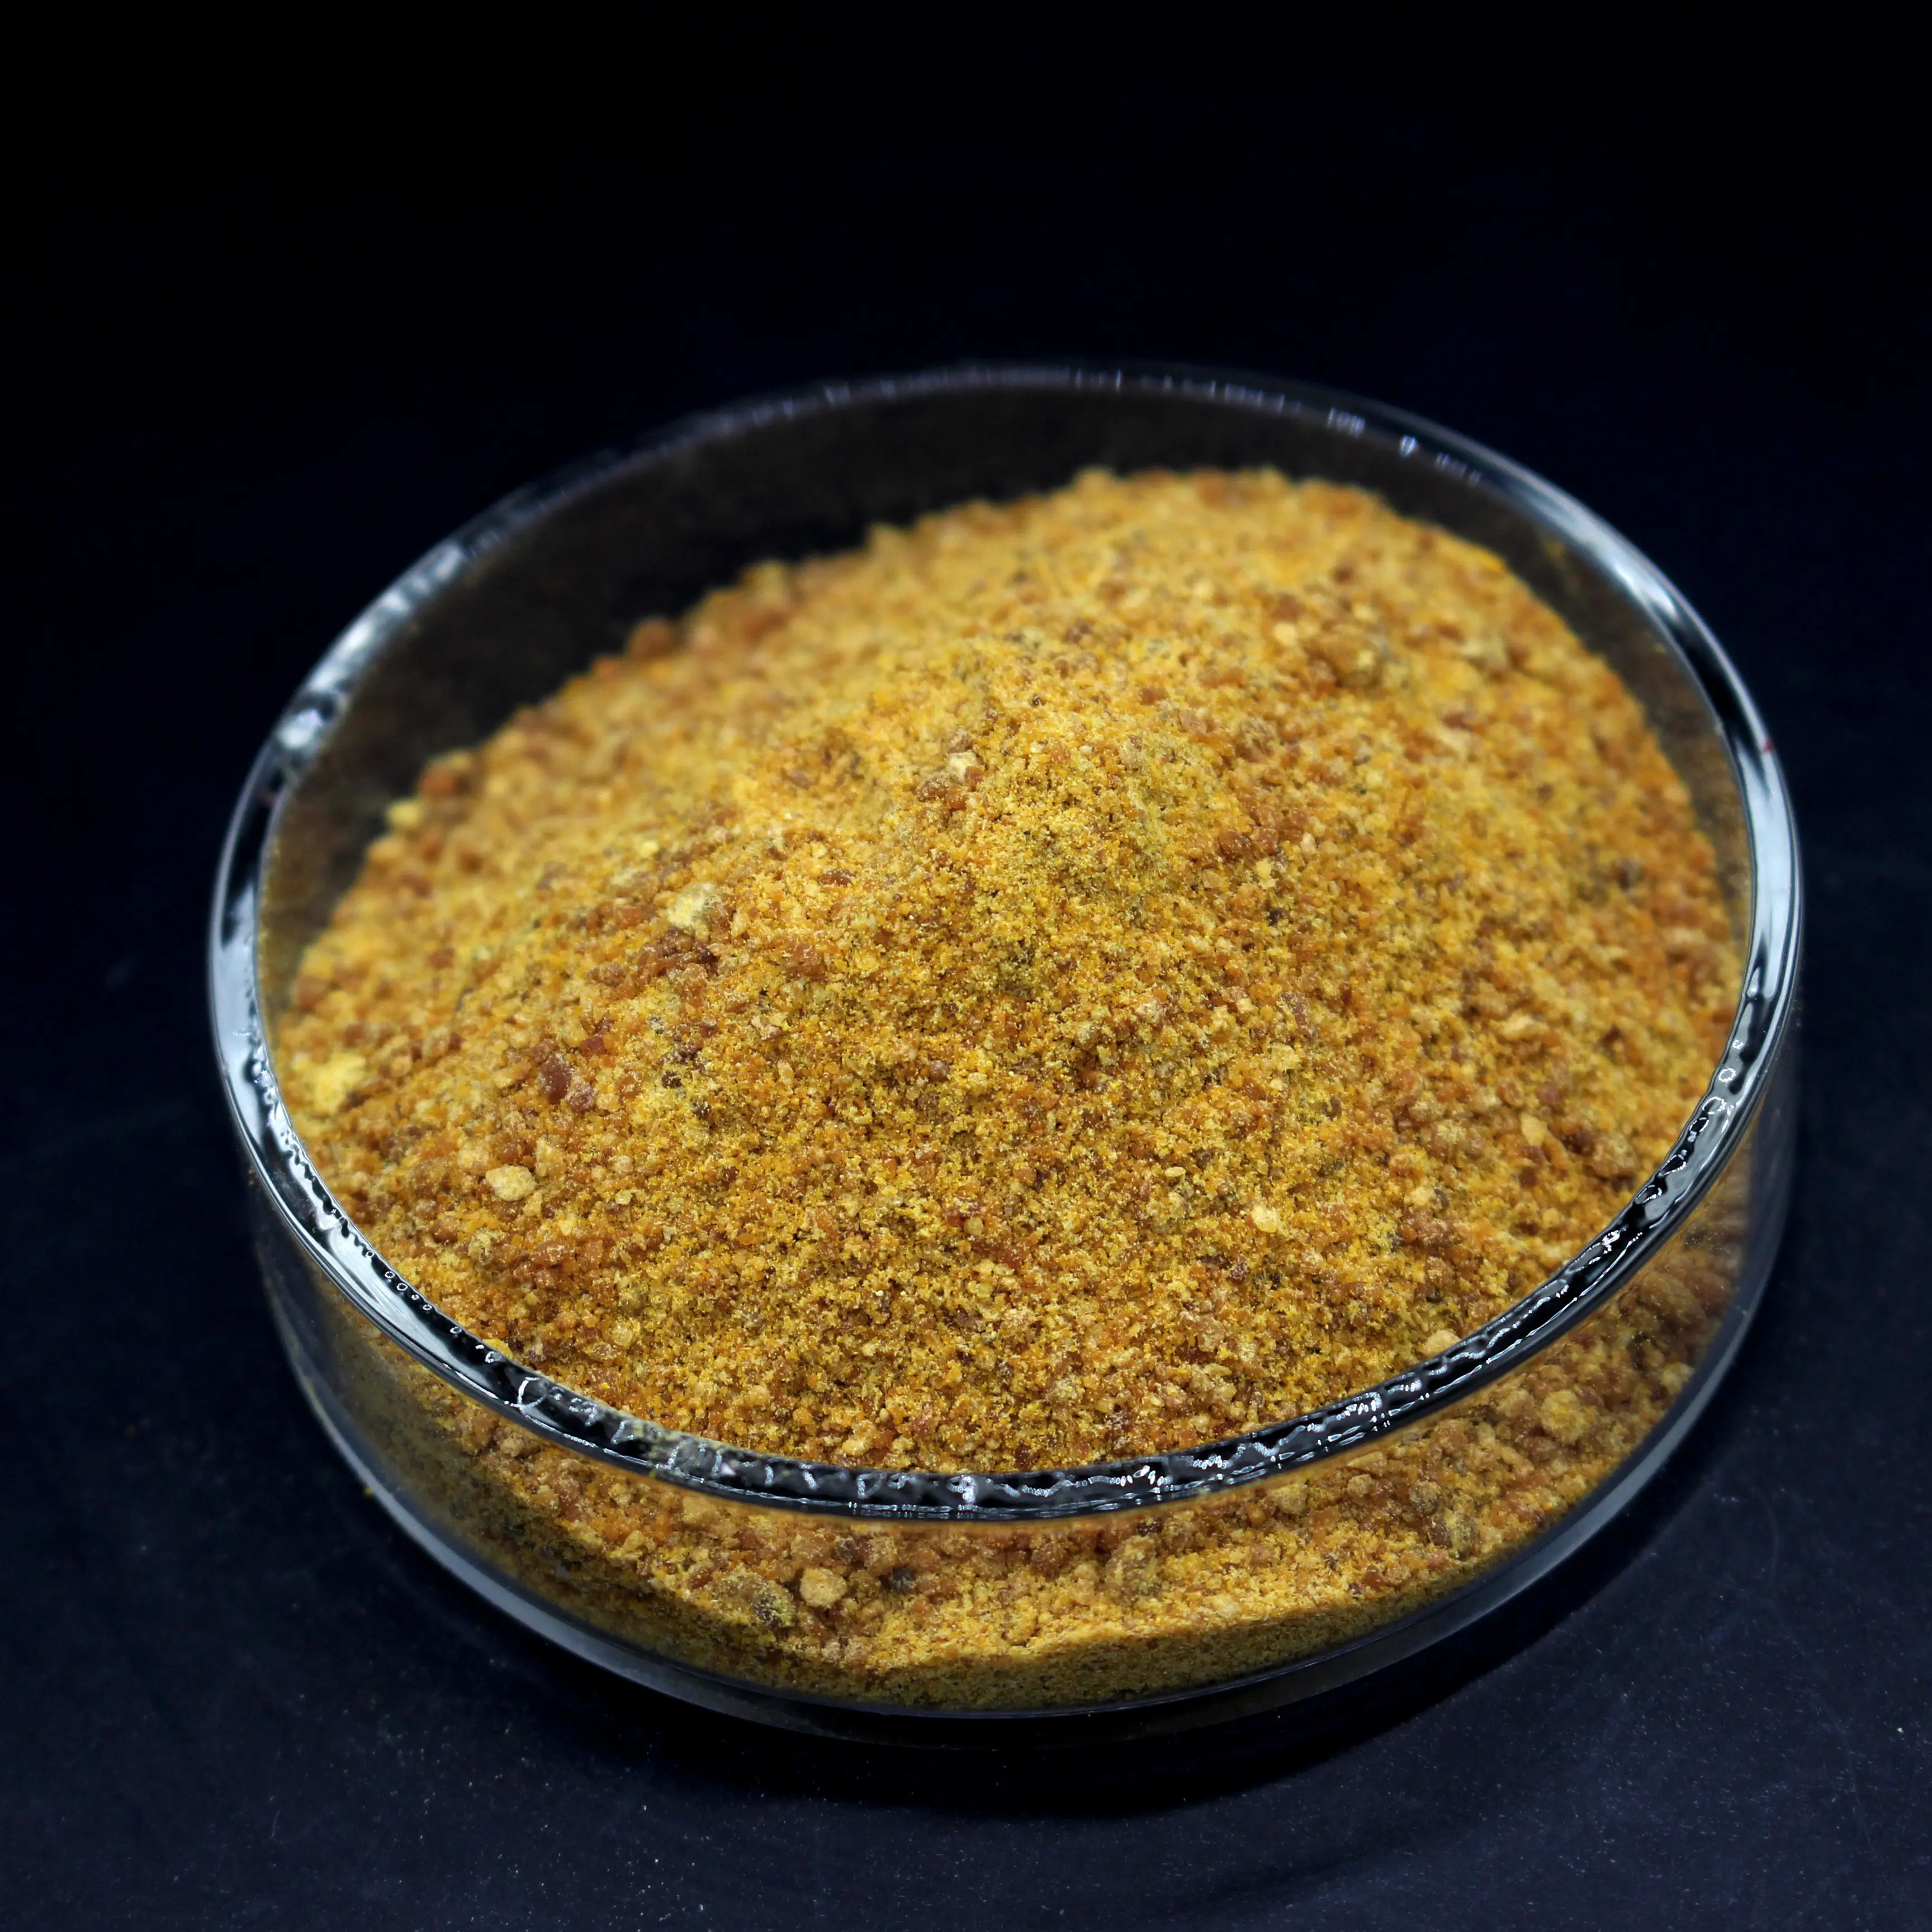 Corn Gluten Meal used for poultry and livestock